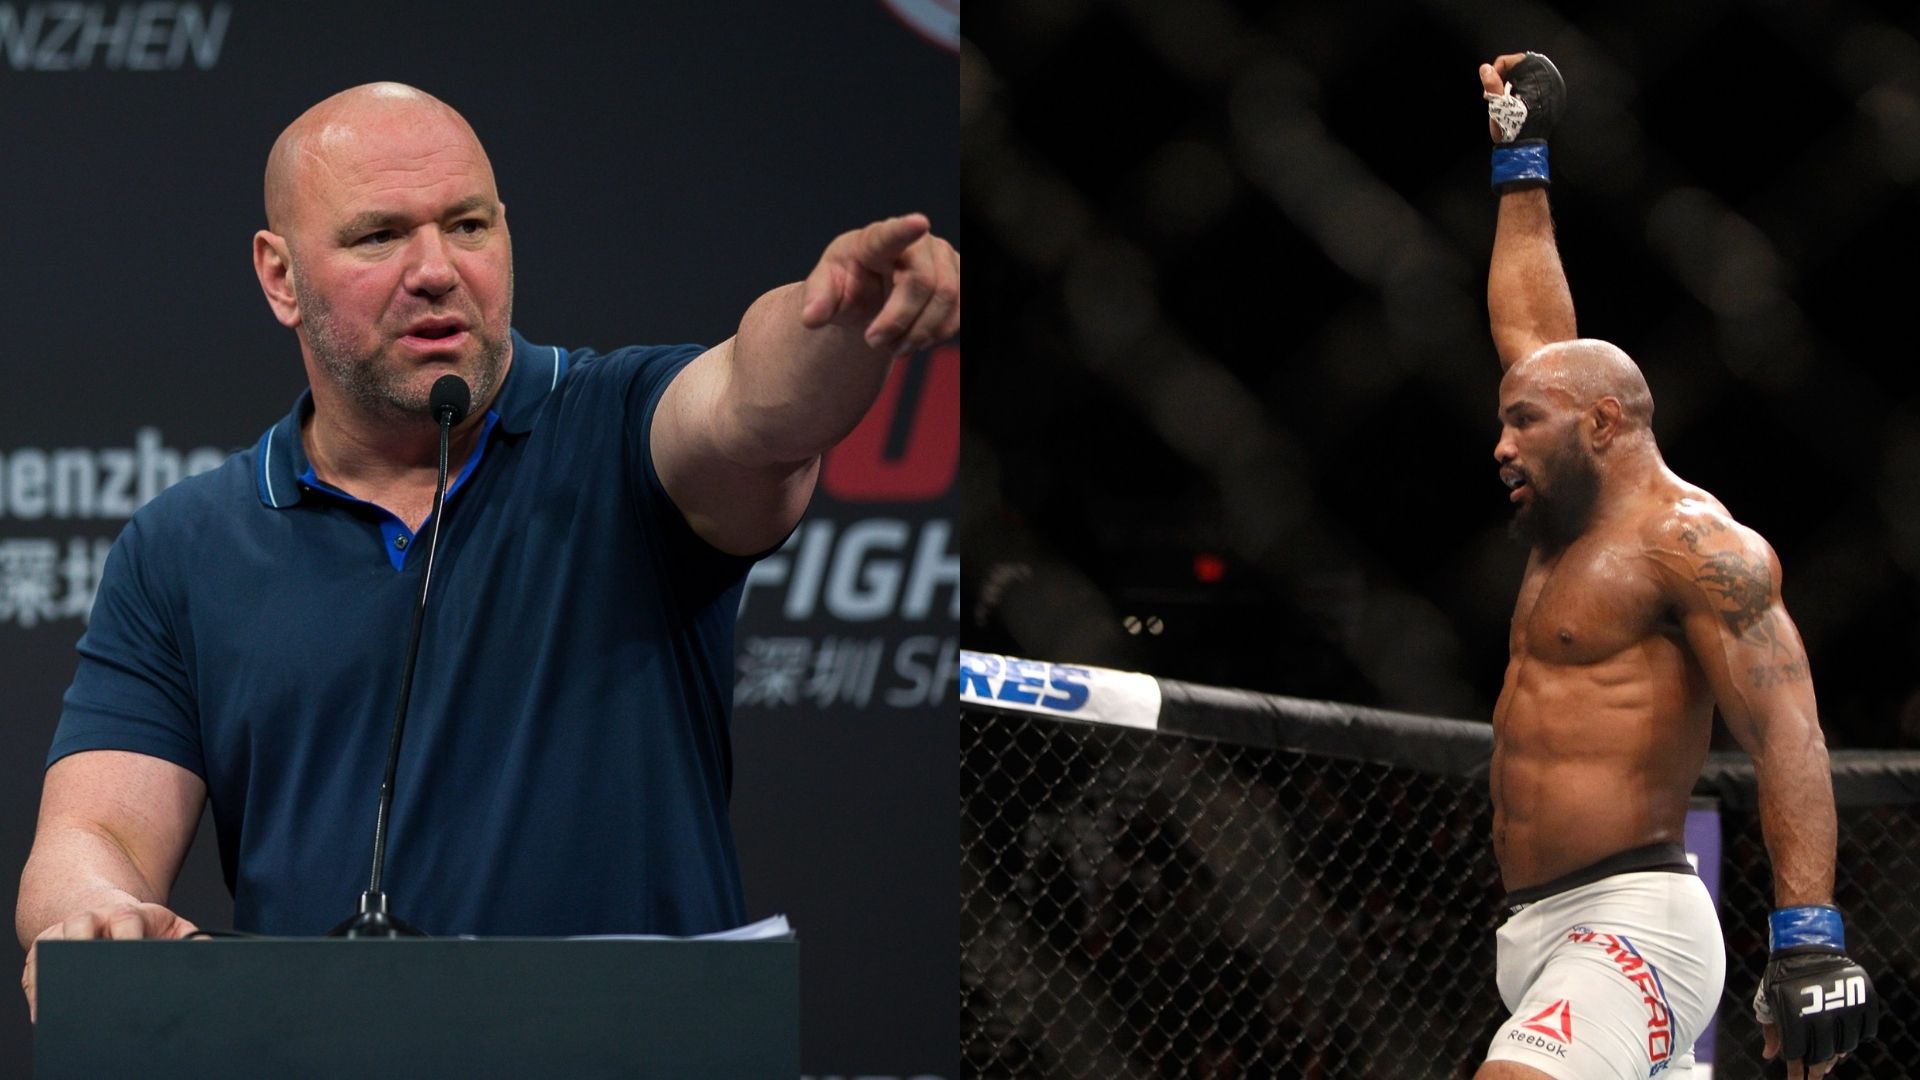 Dana White has confirmed there are major roster cuts planned by the UFC before 2020 ends